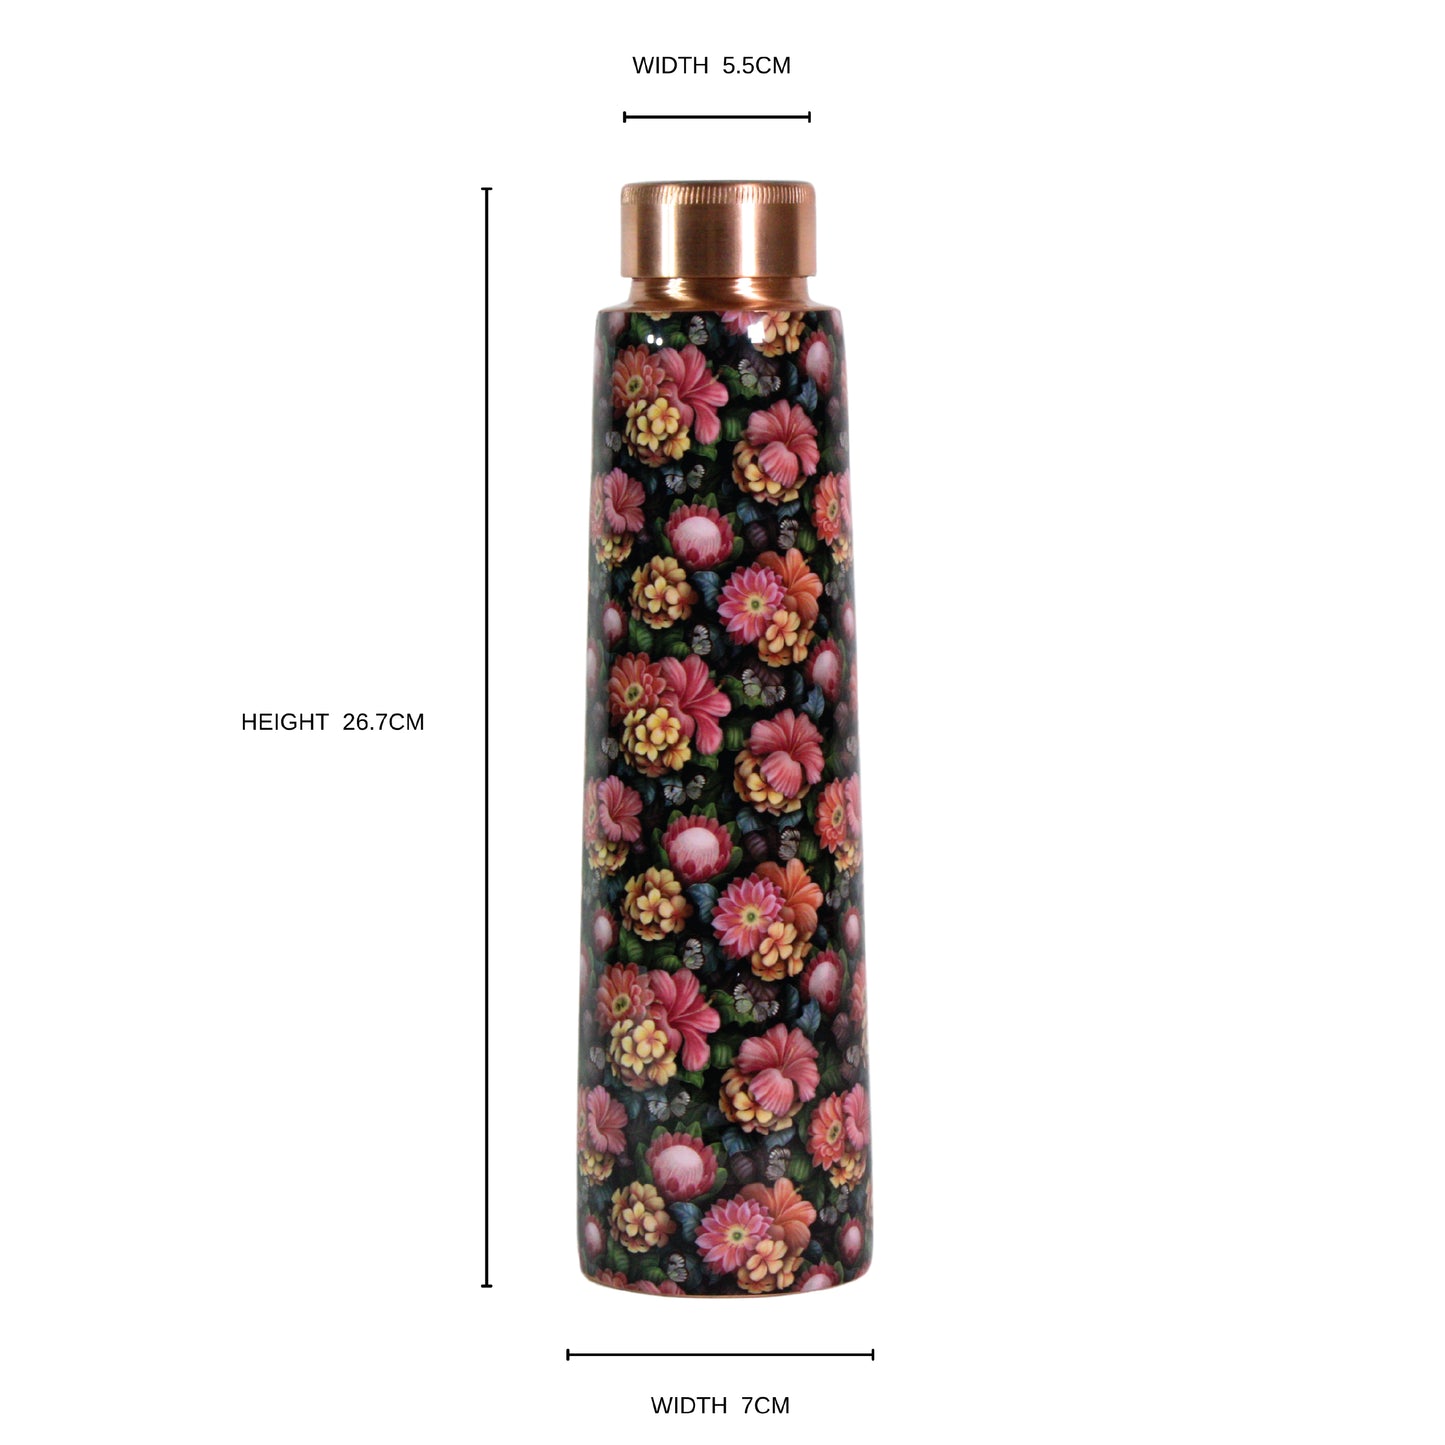 'The Magical Flower' Printed Copper Bottle